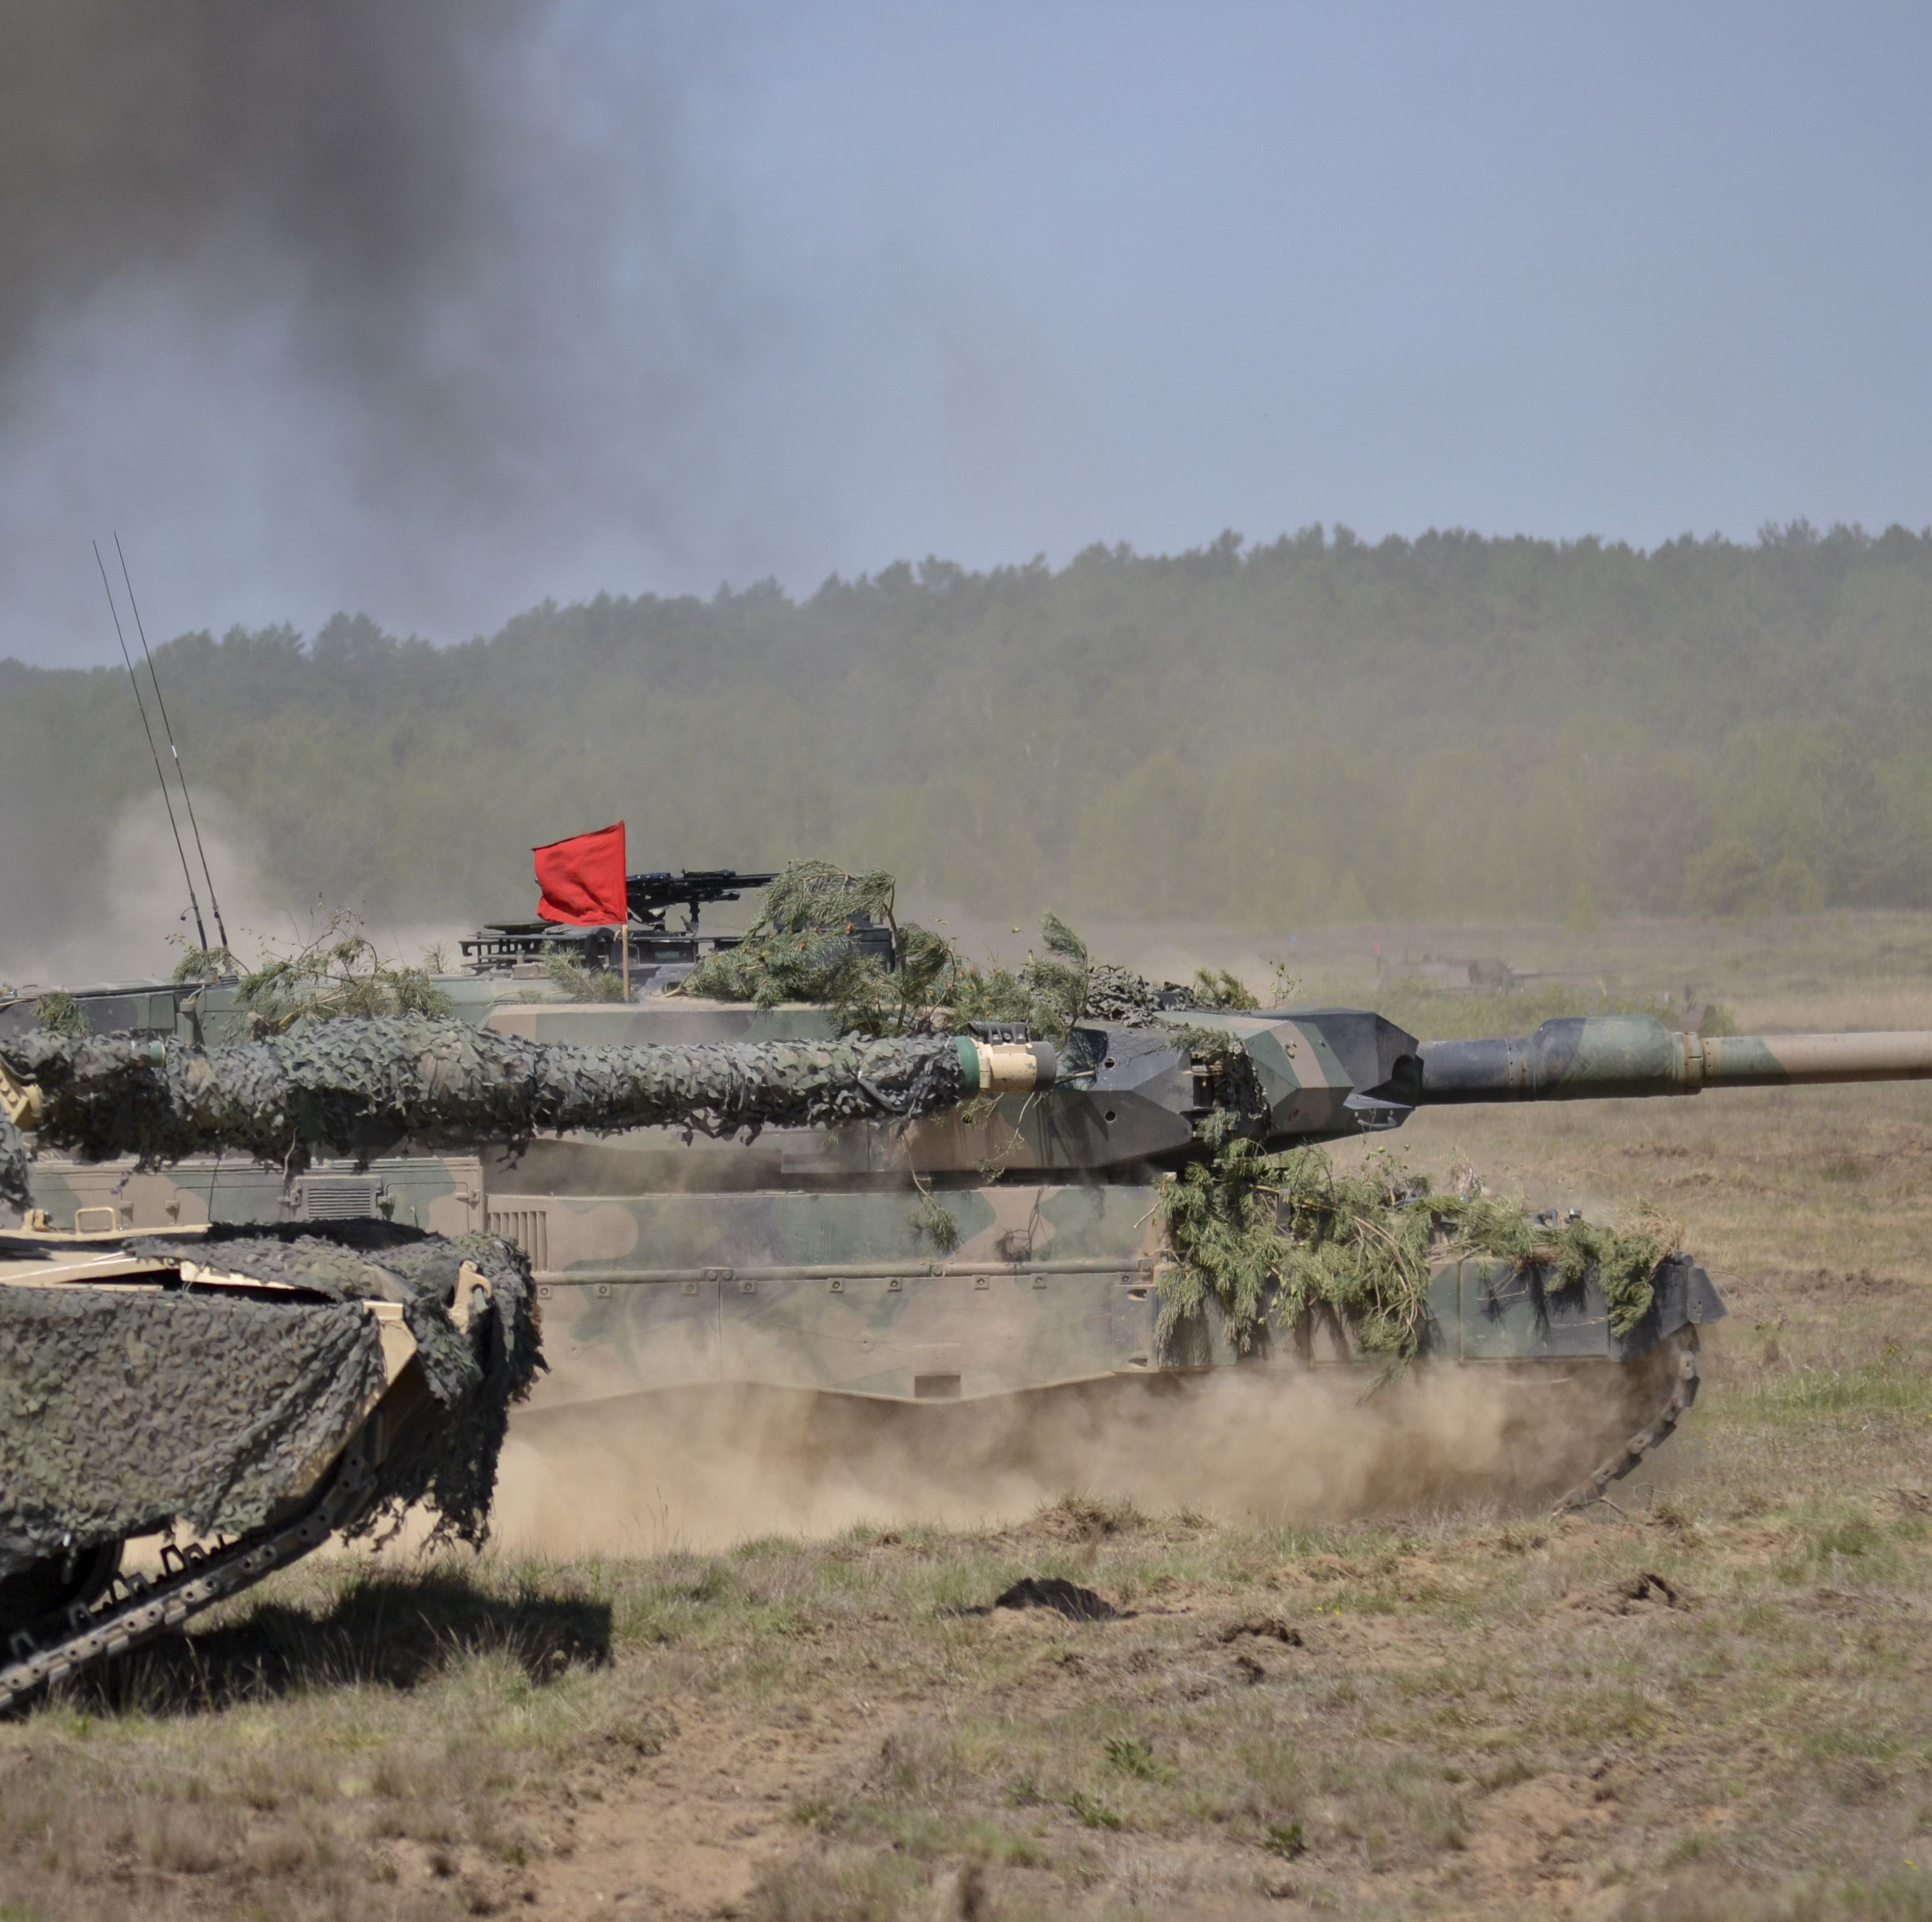 Finally, Ukraine Will Receive Leopard 2 Tanks From Germany and the U.S.